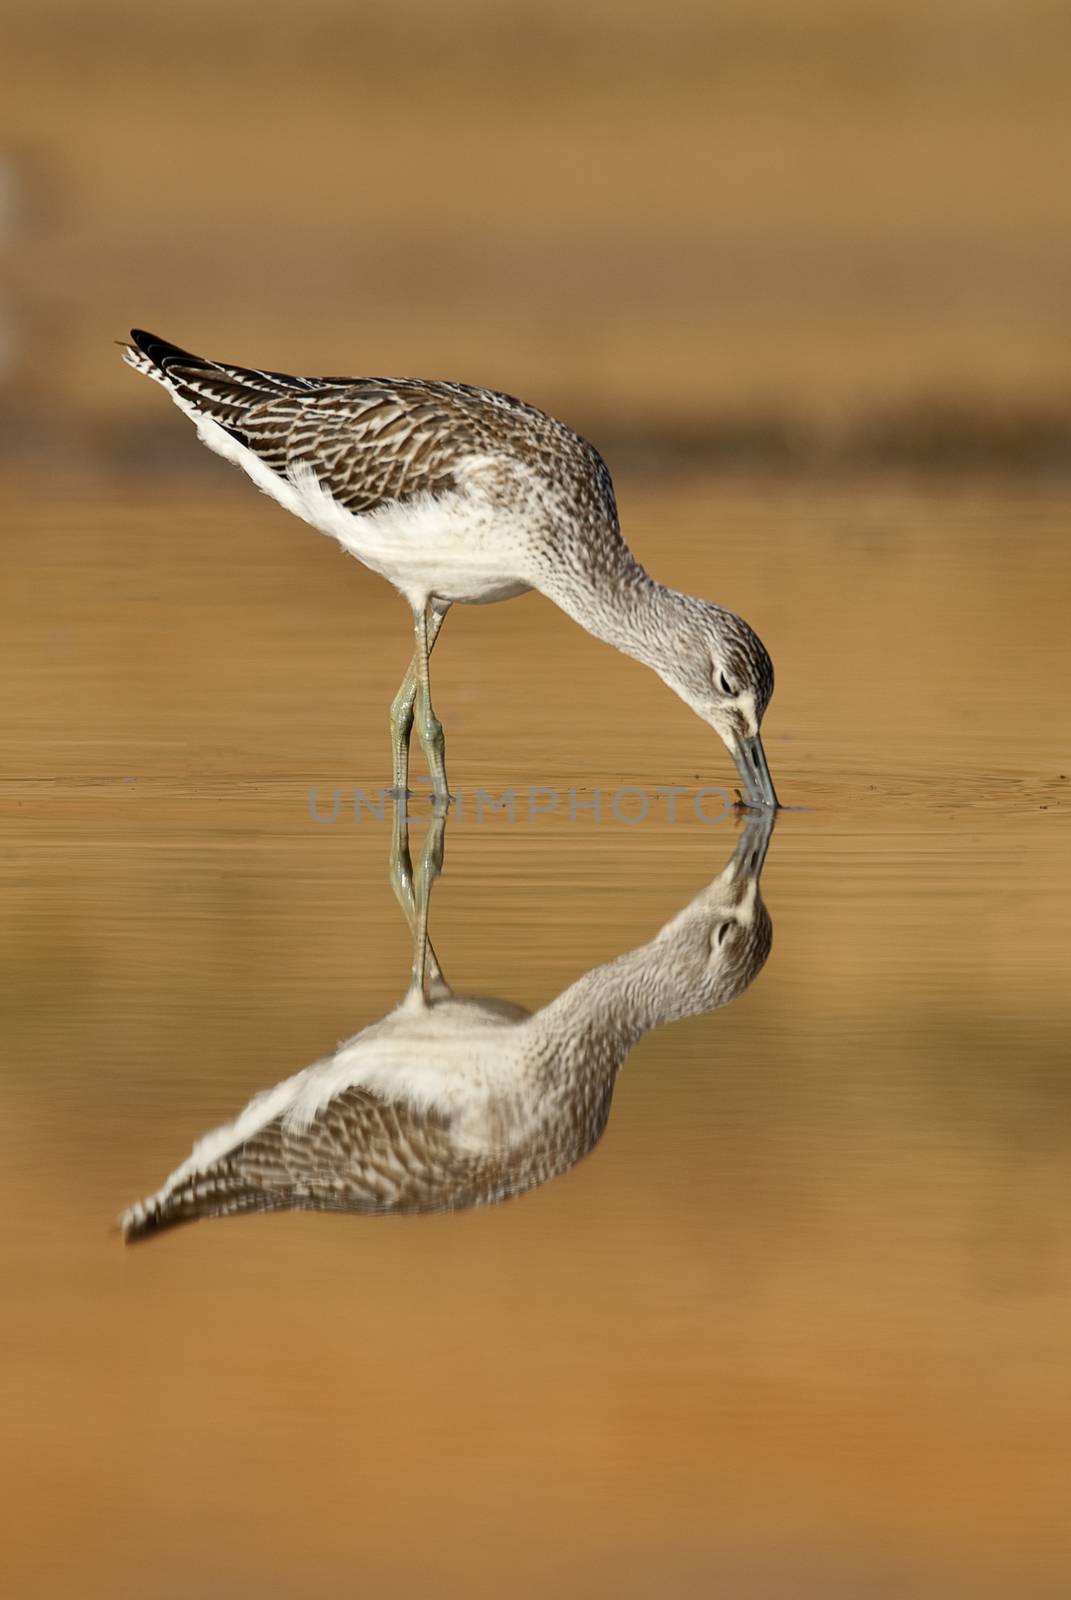 Common Greenshank, Tringa nebularia, Looking for food in the water at sunset